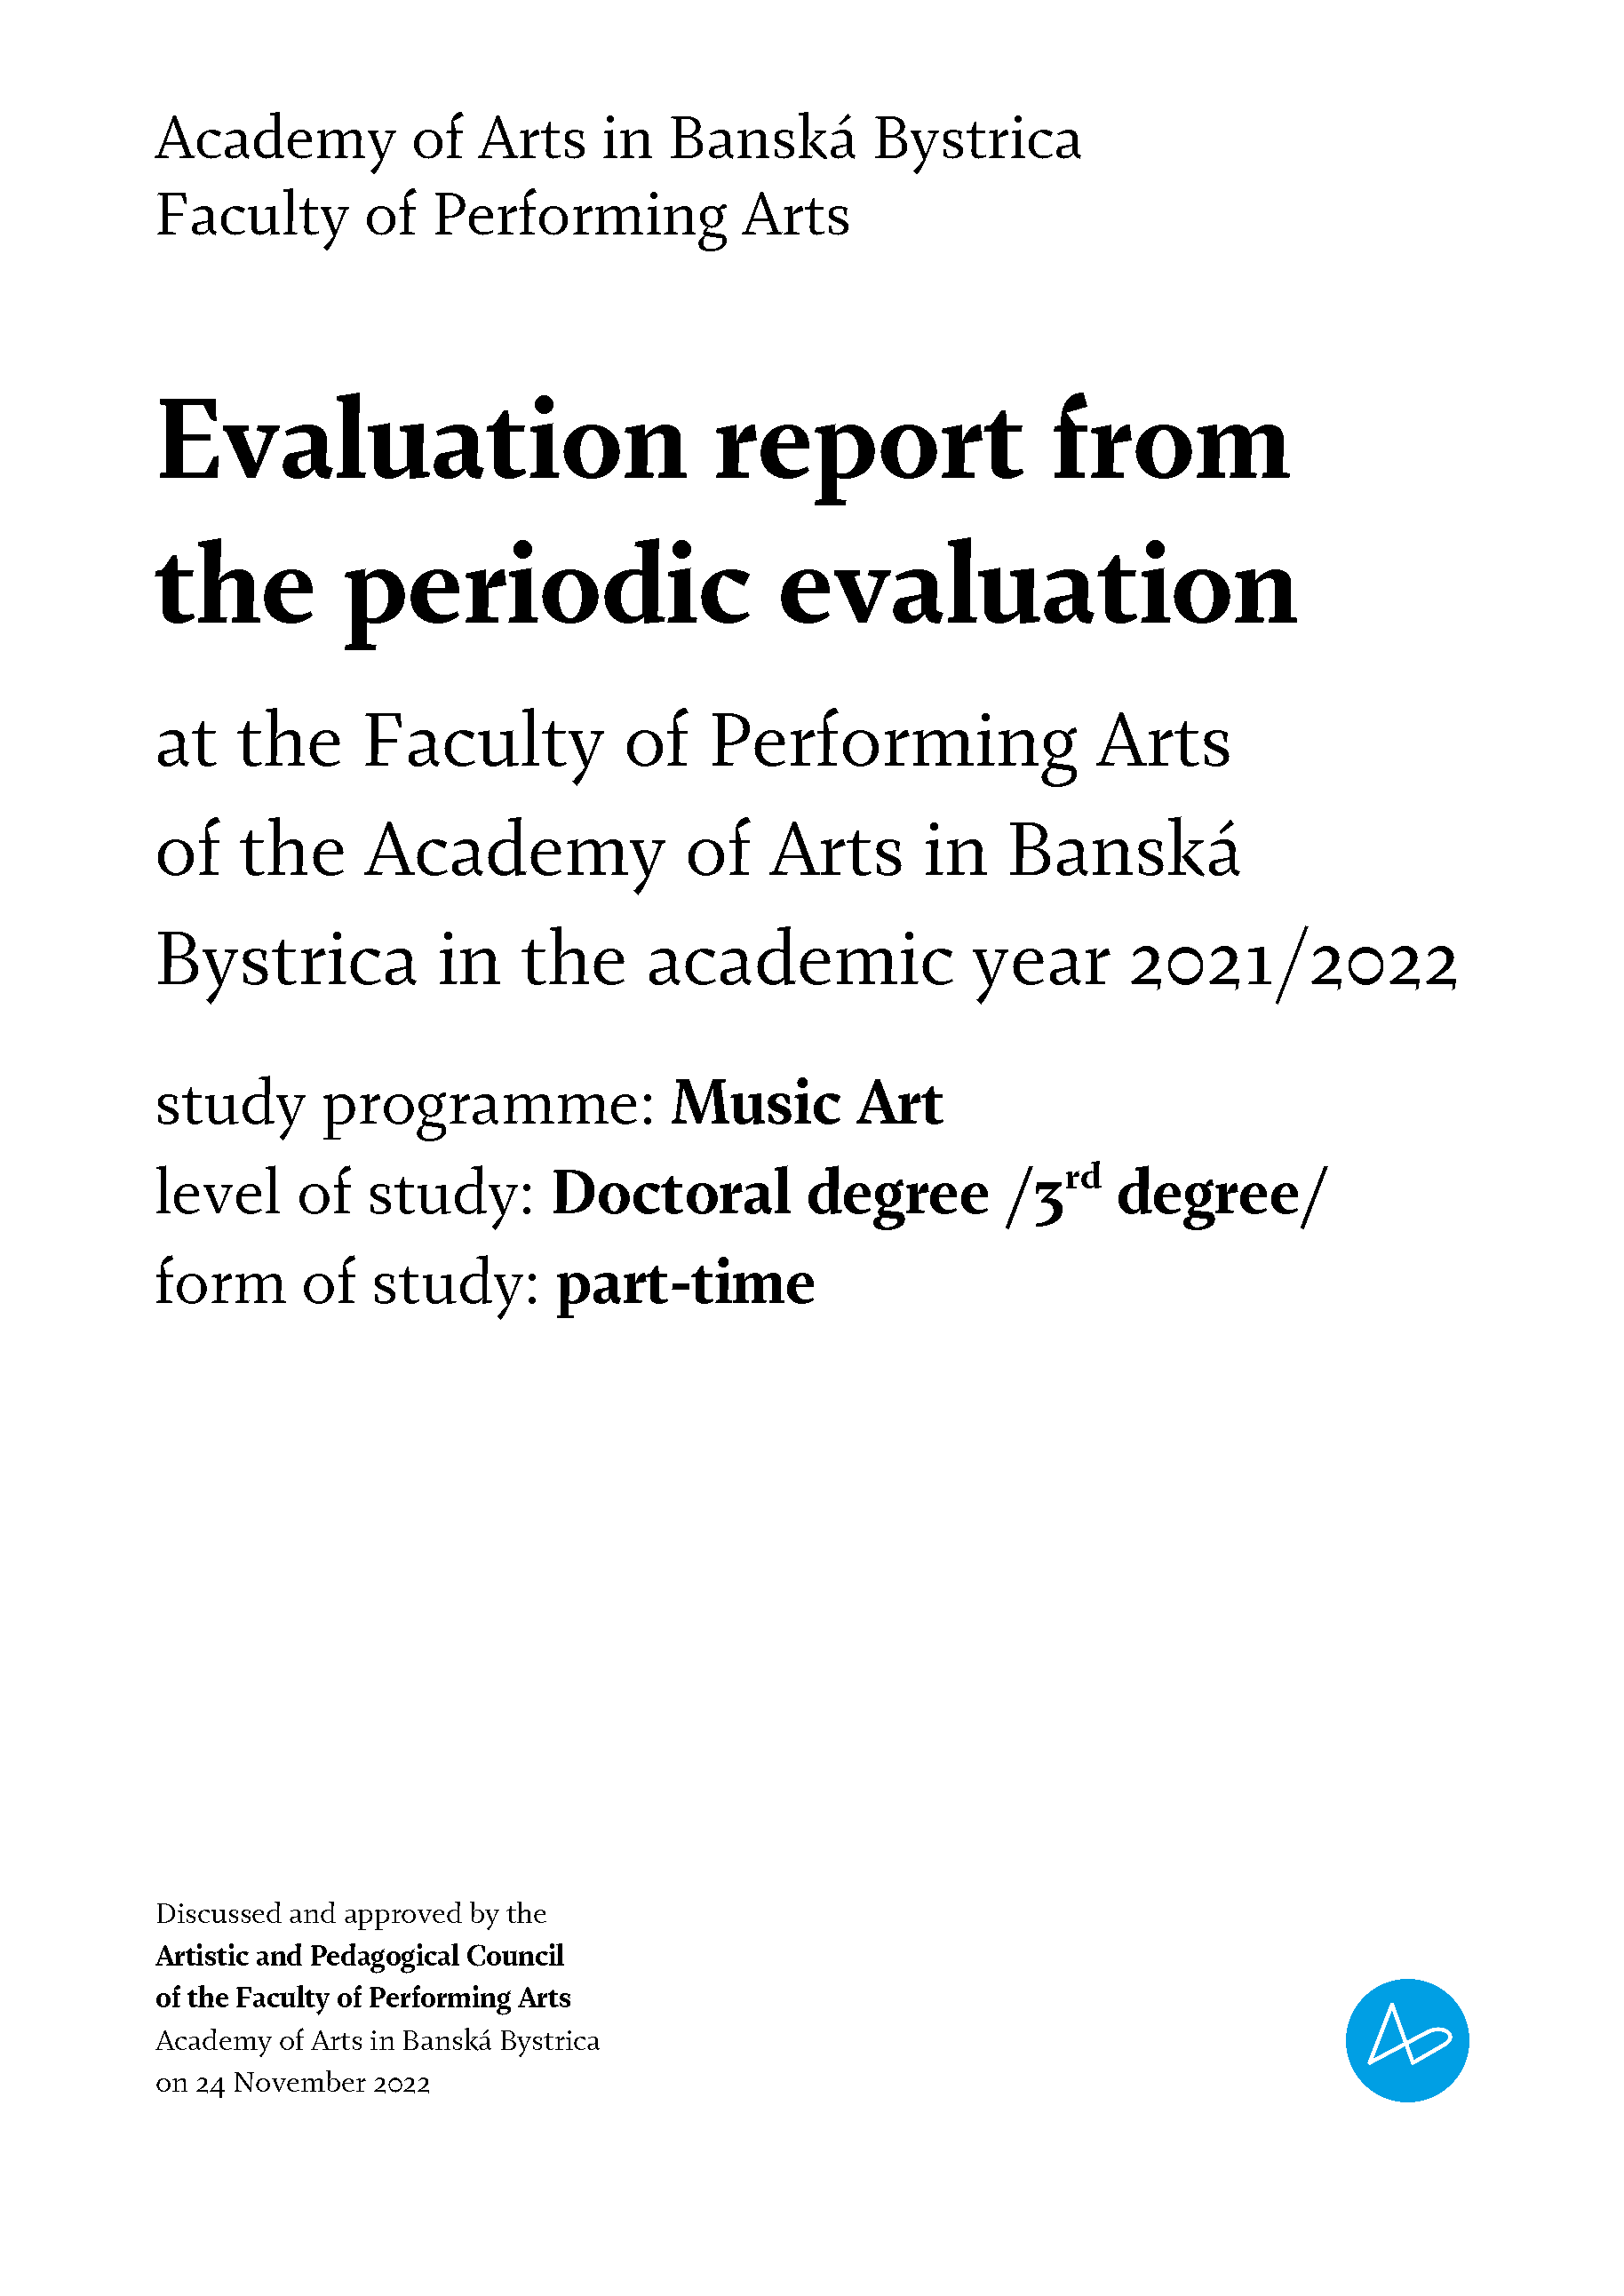 evaluation report ArtD. 2021 2022 part time thumb